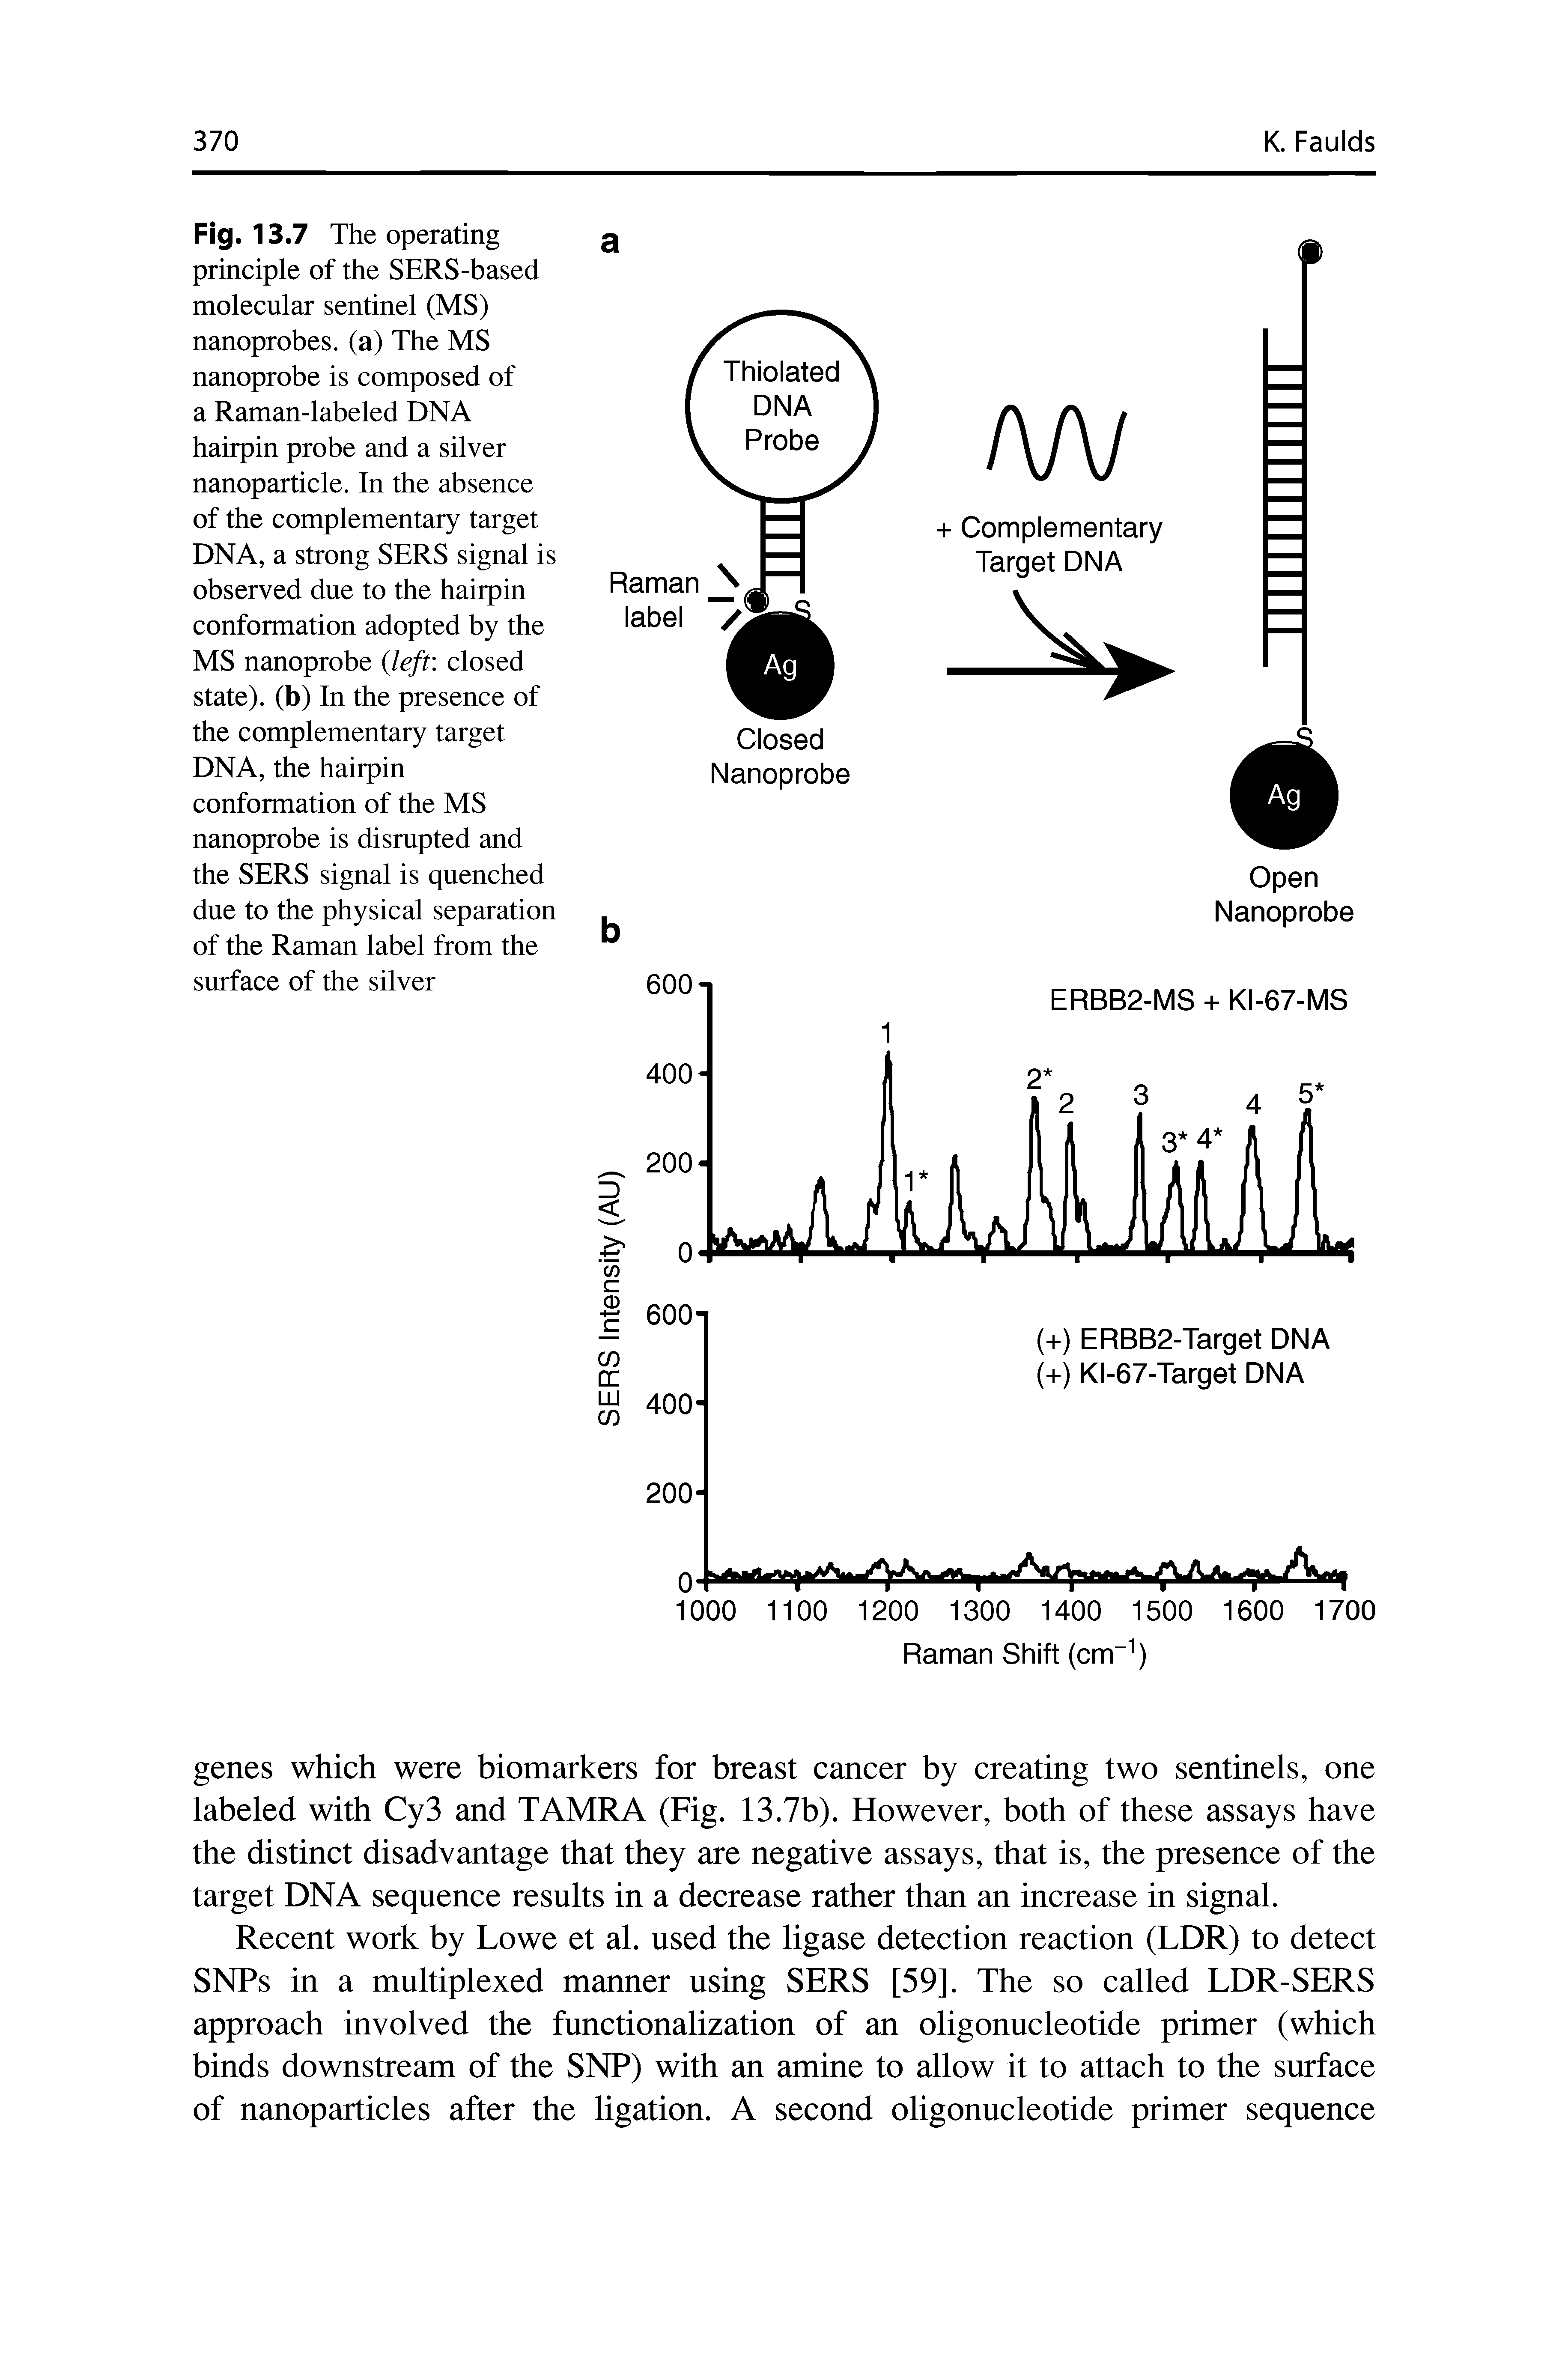 Fig. 13.7 The operating principle of the SERS-based molecular sentinel (MS) nanoprobes, (a) The MS nanoprobe is composed of a Raman-labeled DNA hairpin probe and a silver nanoparticle. In the absence of the complementary target DNA, a strong SERS signal is observed due to the hairpin conformation adopted by the MS nanoprobe (left closed state), (b) In the presence of the complementary target DNA, the hairpin conformation of the MS nanoprobe is disrupted and the SERS signal is quenched due to the physical separation of the Raman label from the surface of the silver...